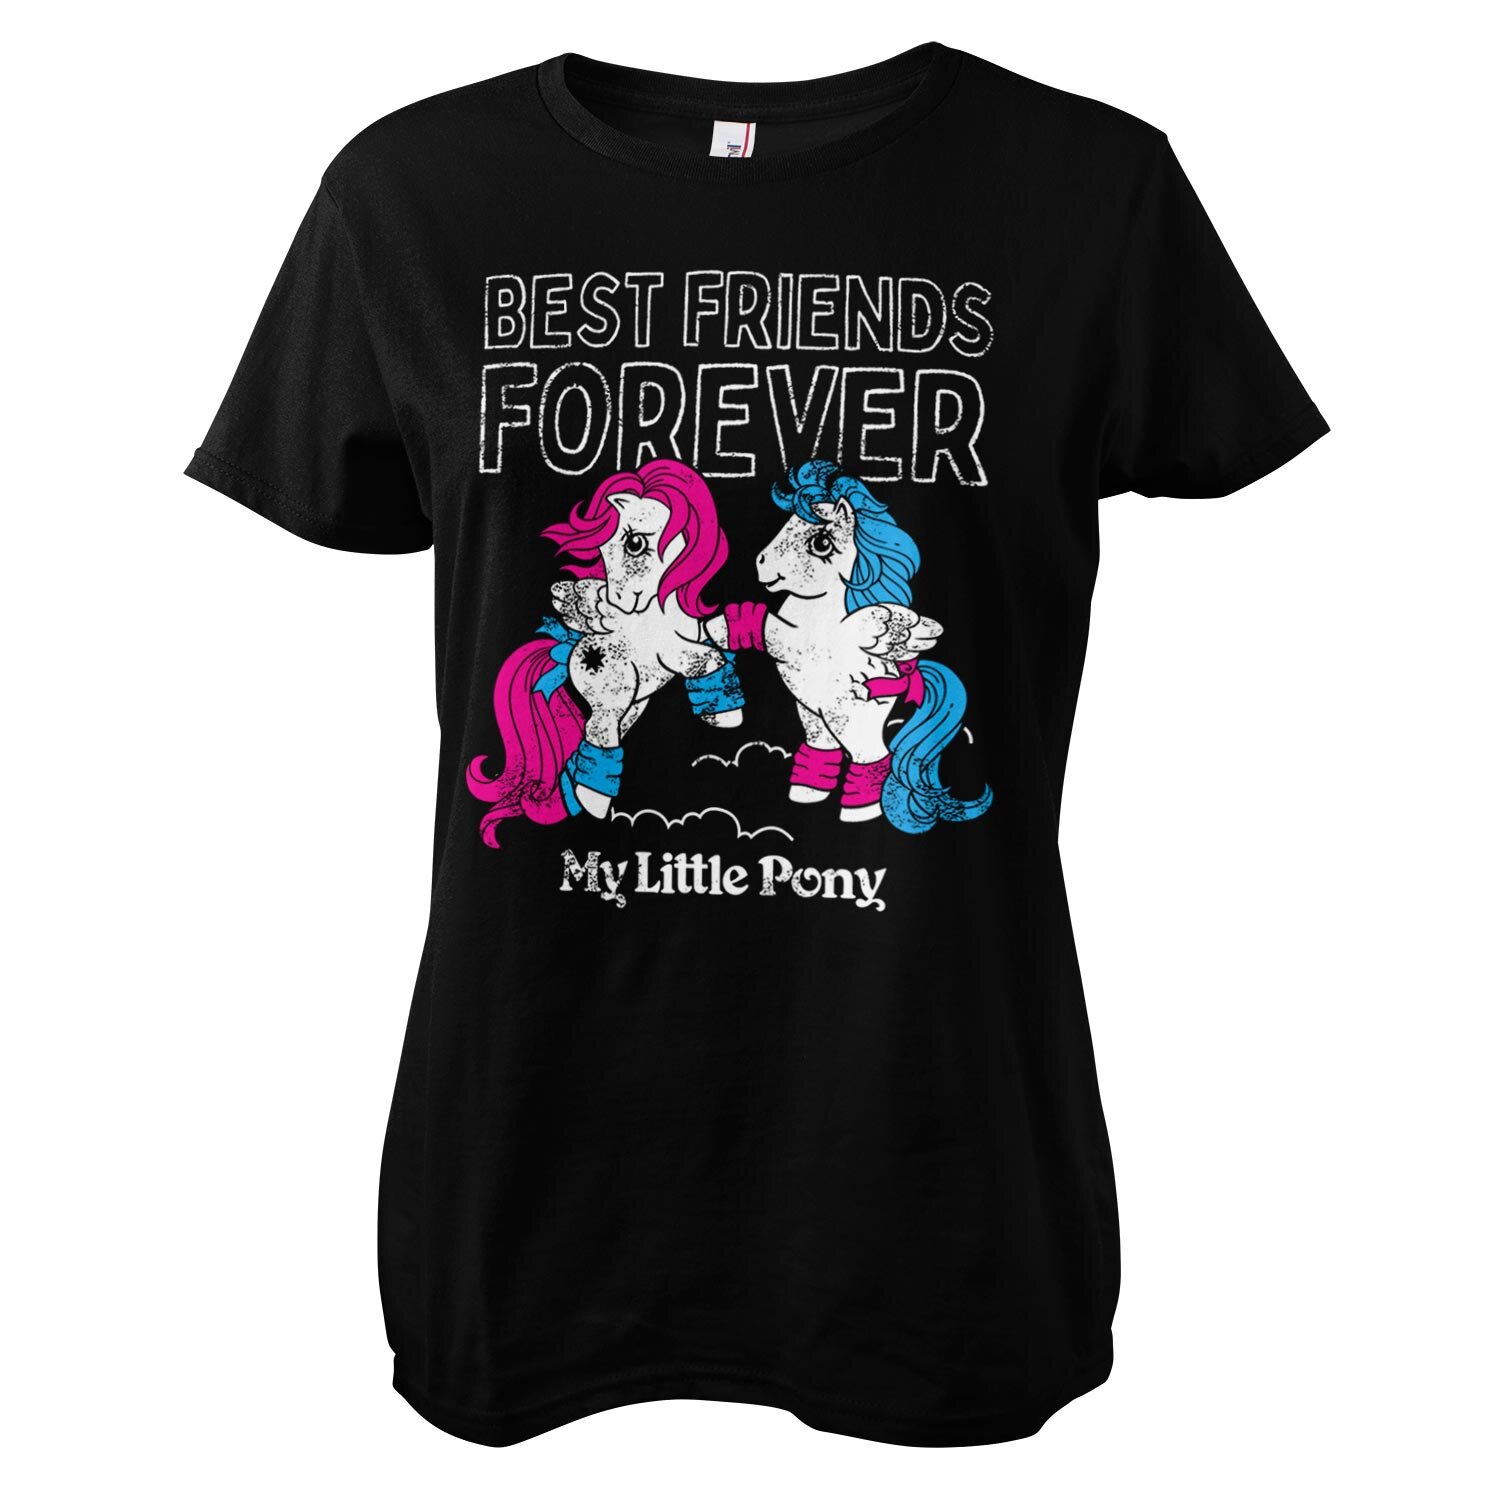 Best Friends Forever Girly Tee